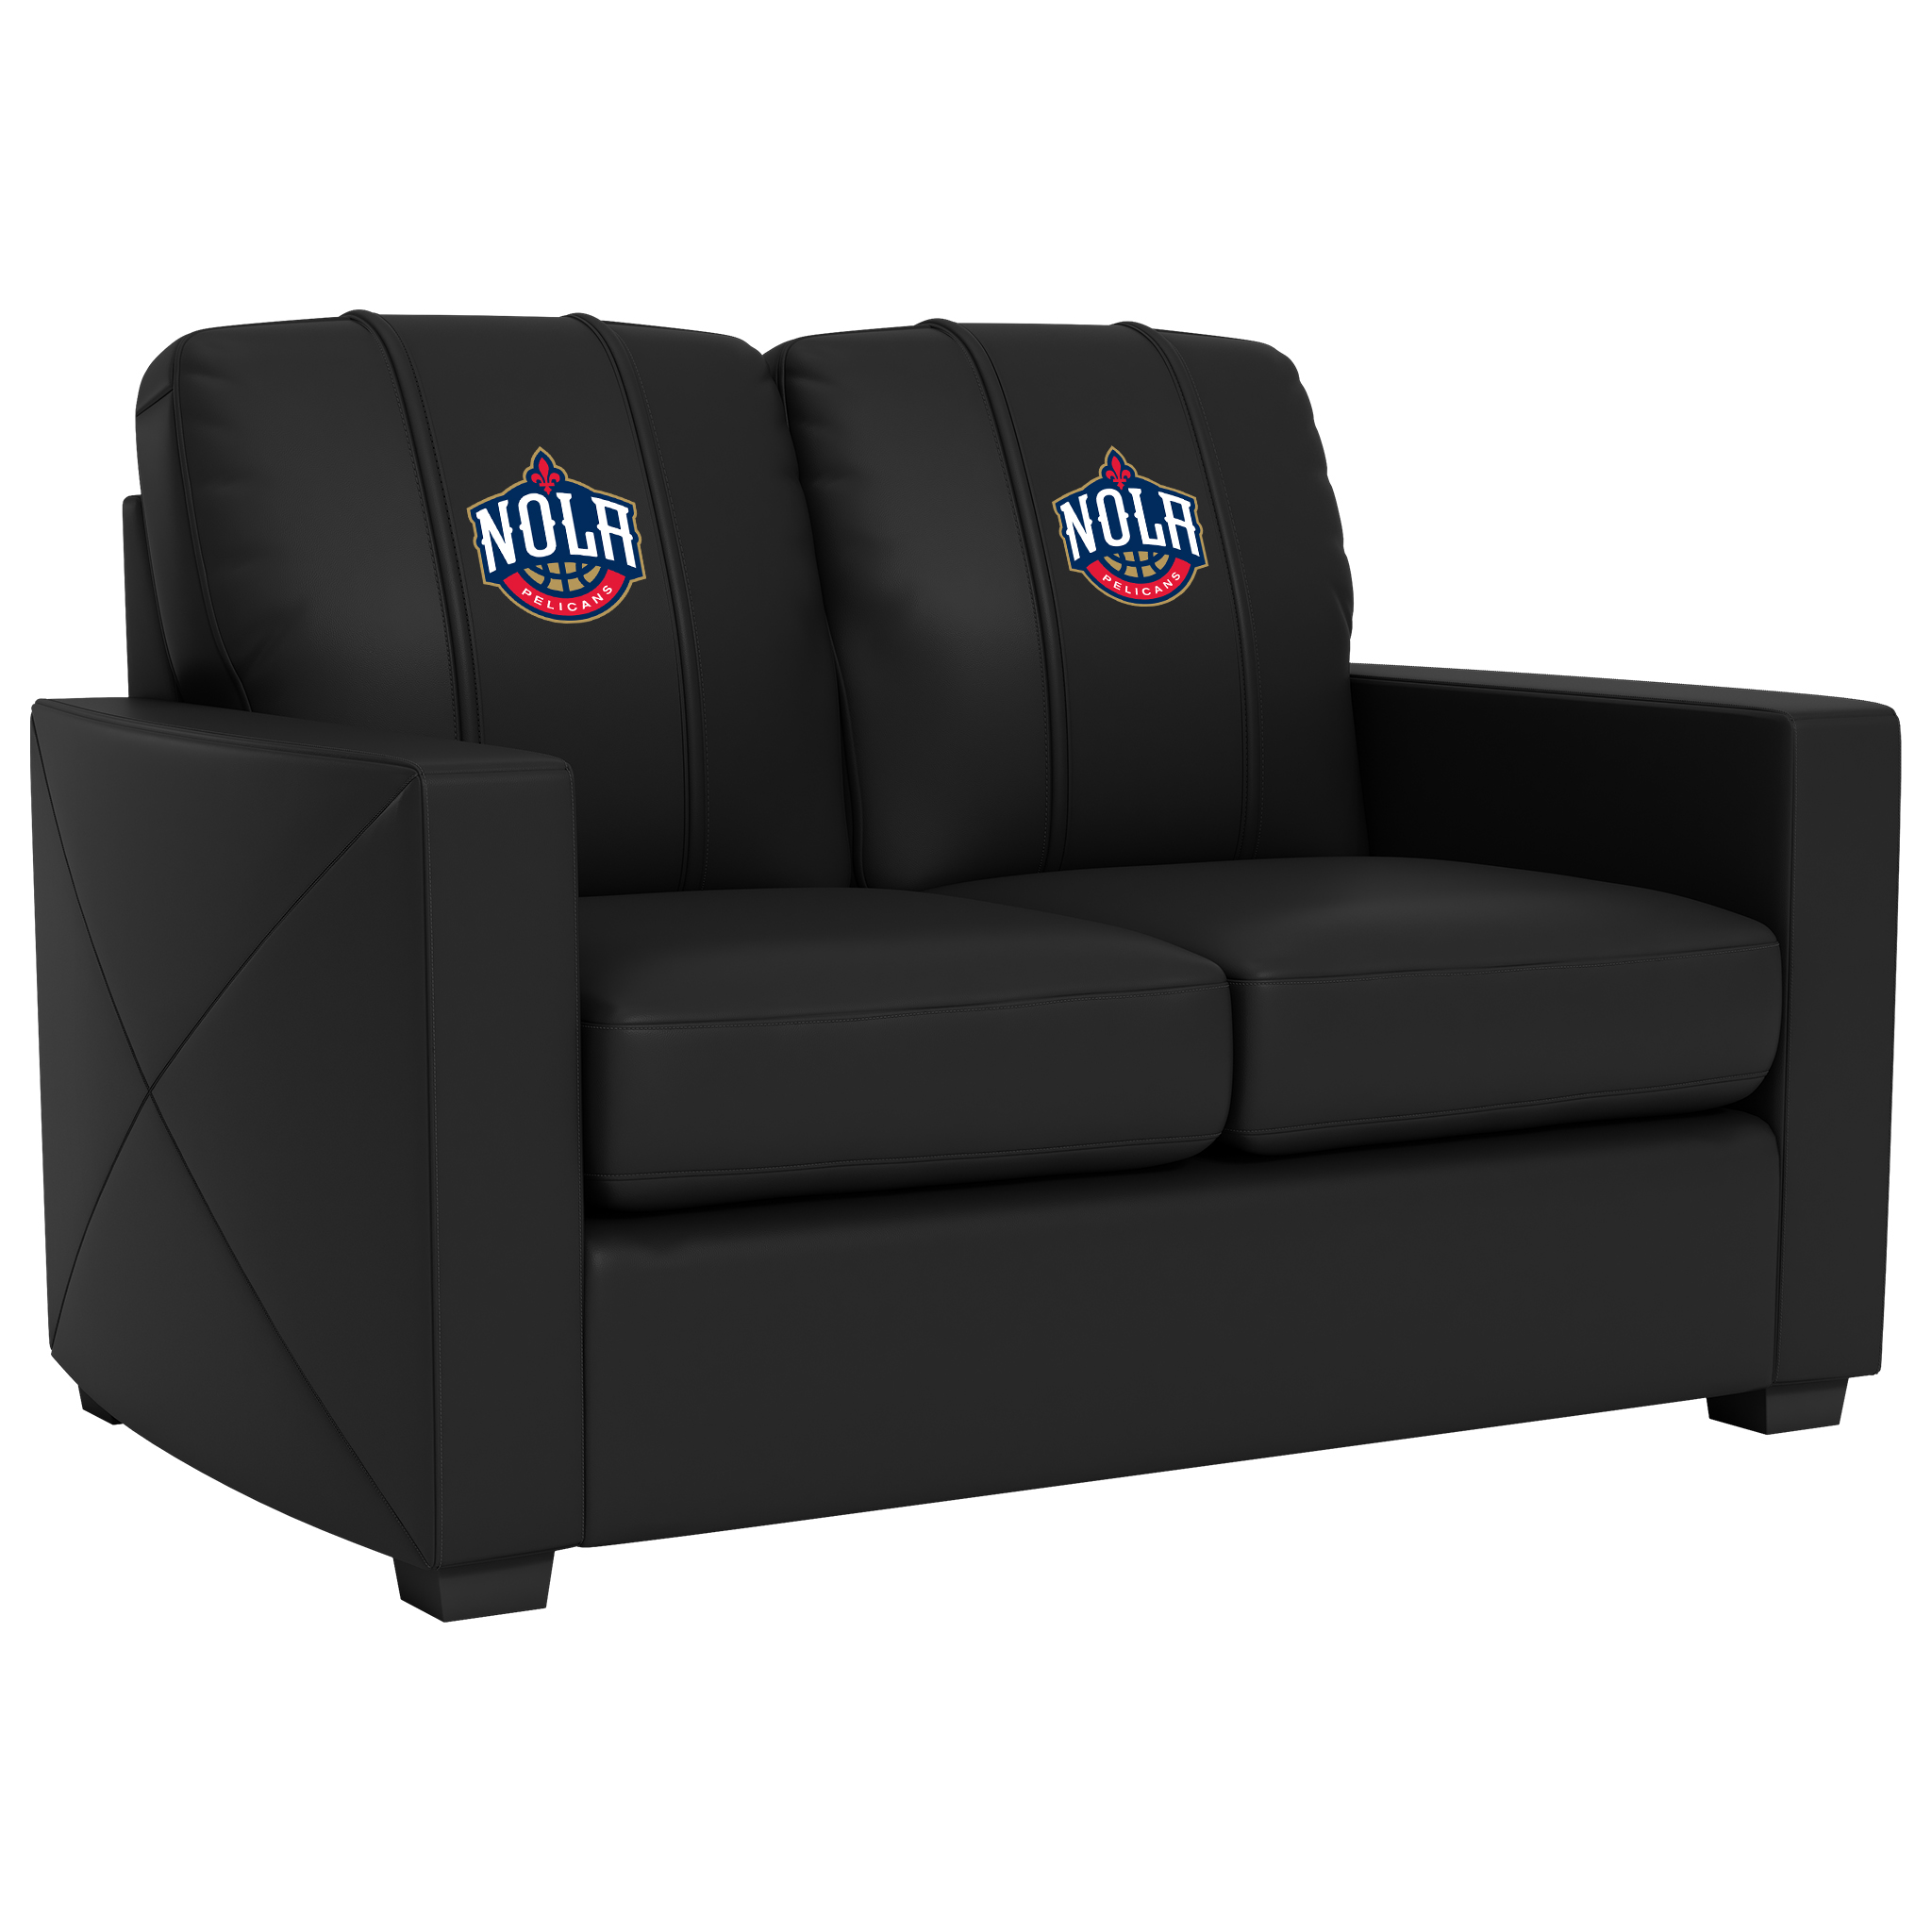 New Orleans Pelicans  Silver Loveseat with New Orleans Pelicans NOLA